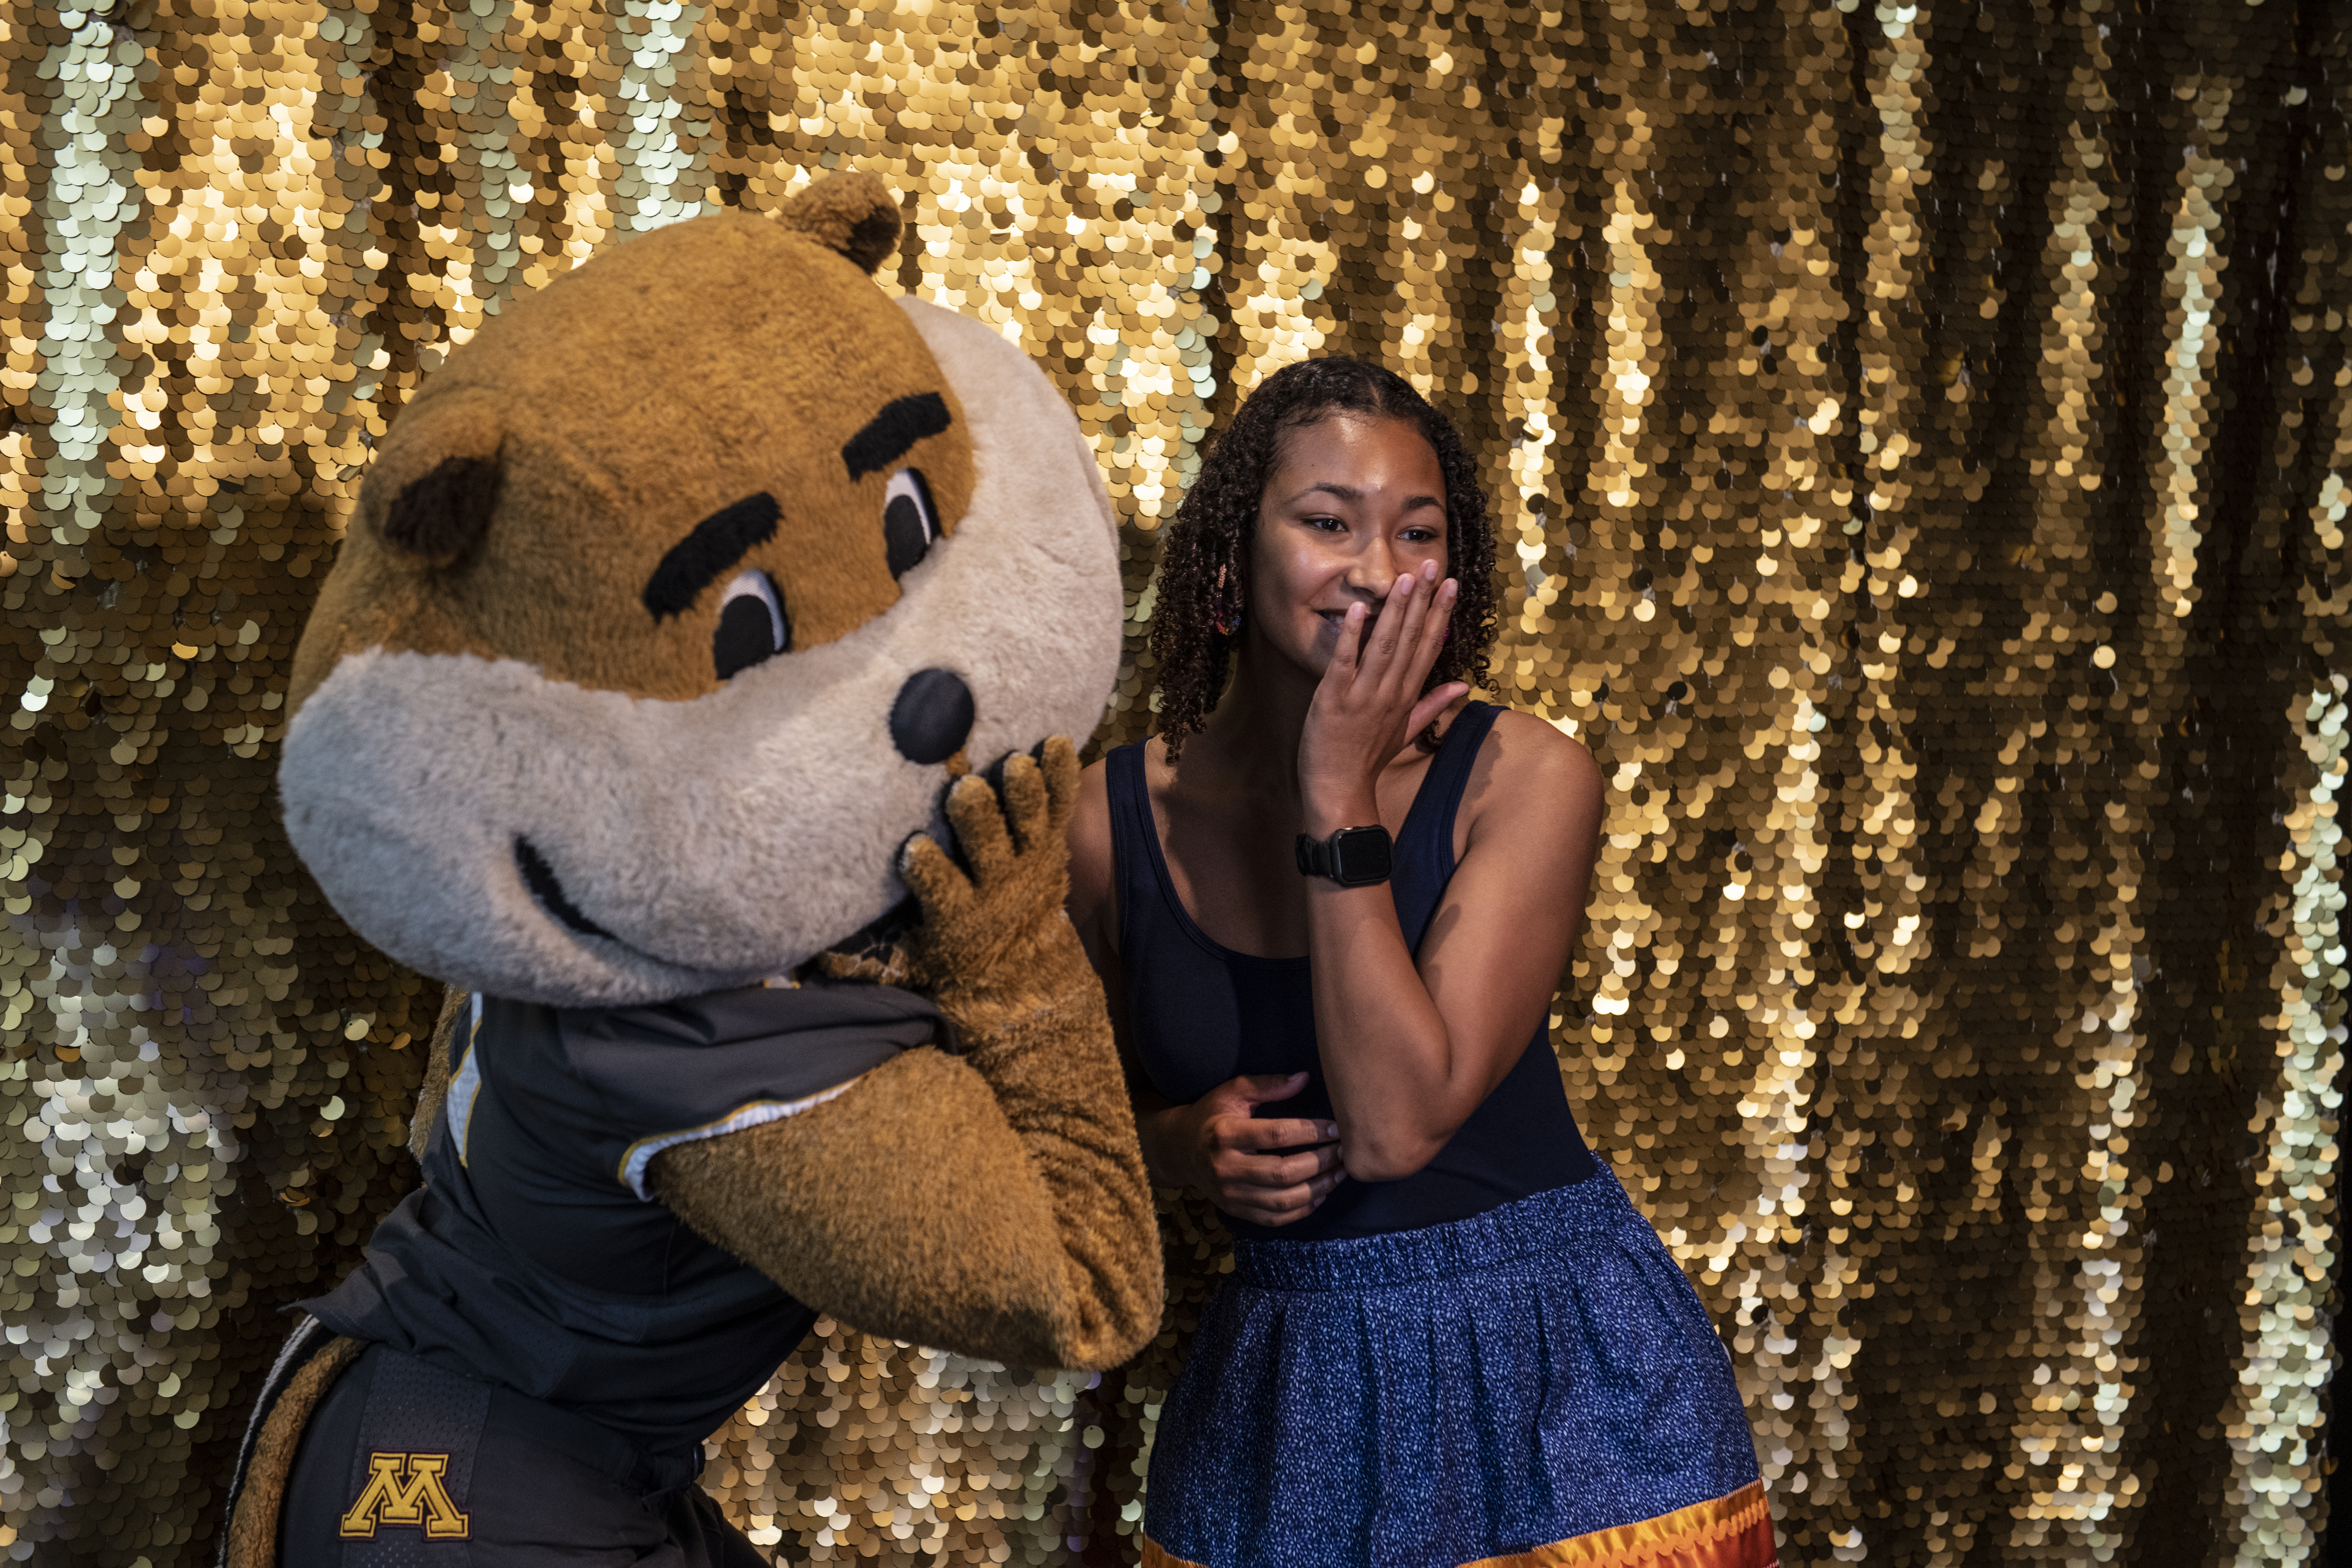 A Native student poses for a picture with Goldy Gopher at the annual N&I KO Program. The student and Goldy pose with their hands over their mouths. The student is wearing a blue ribbon skirt, and Goldy is wearing the UMN football uniform